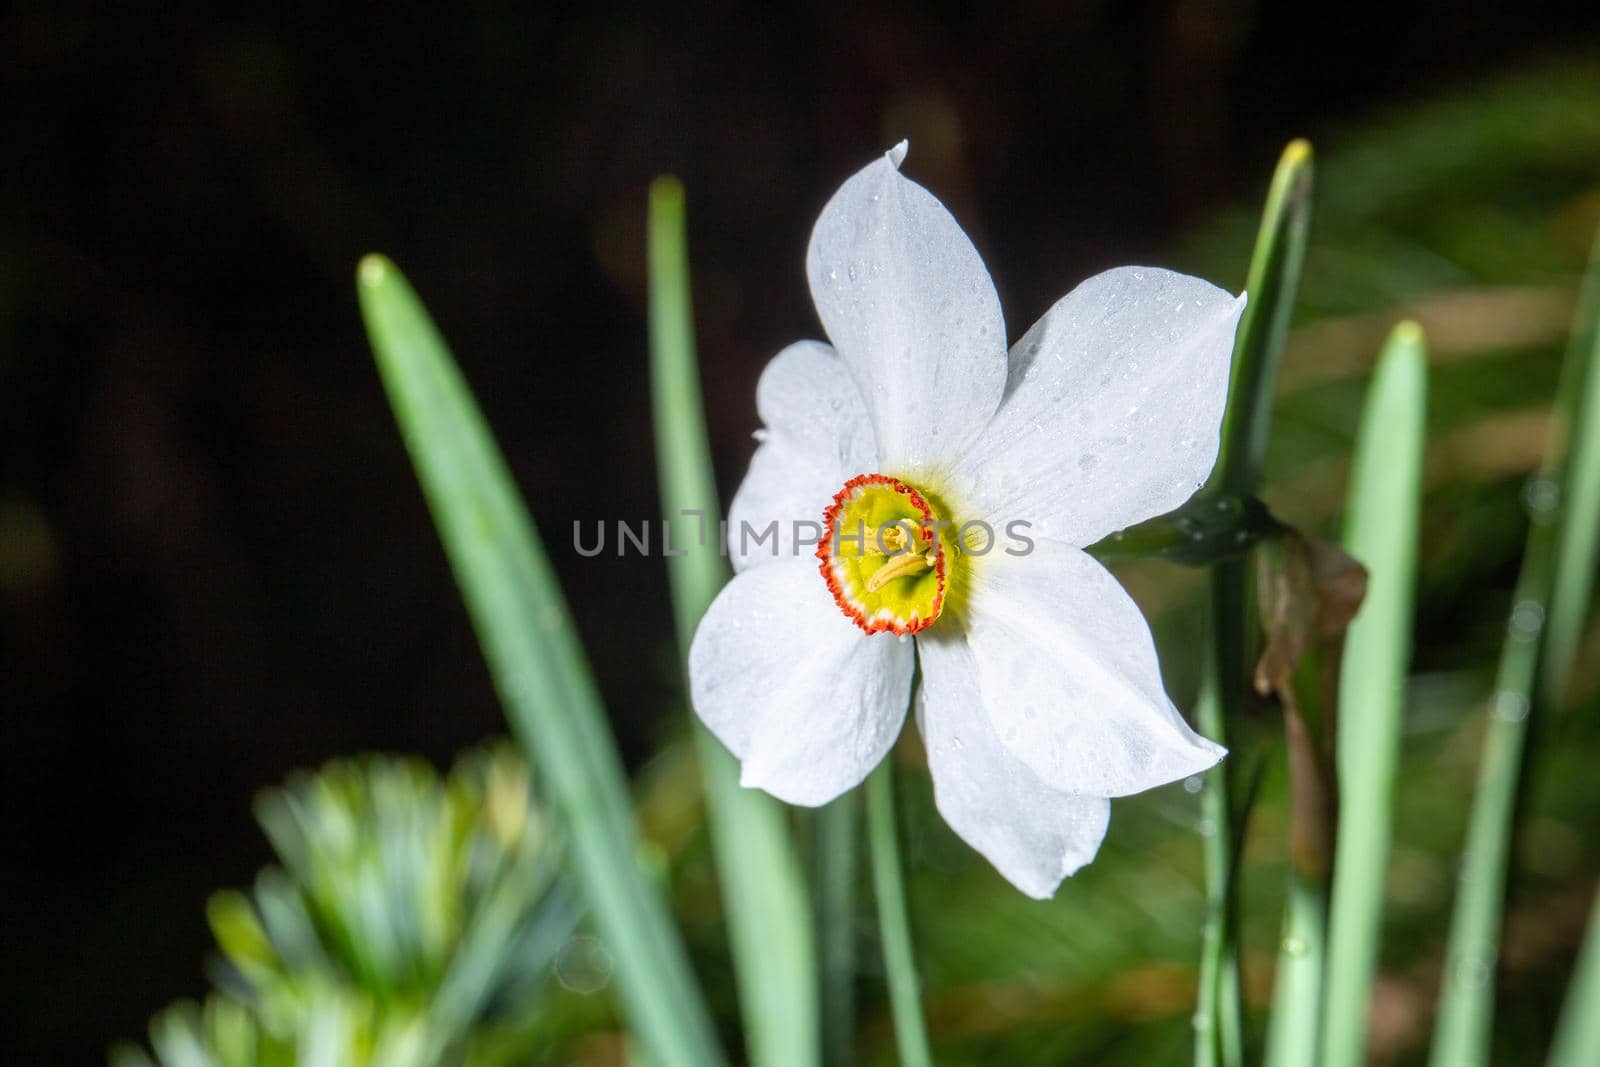 Celebration of life, white narcissus in spring over blurred nature background by clusterx